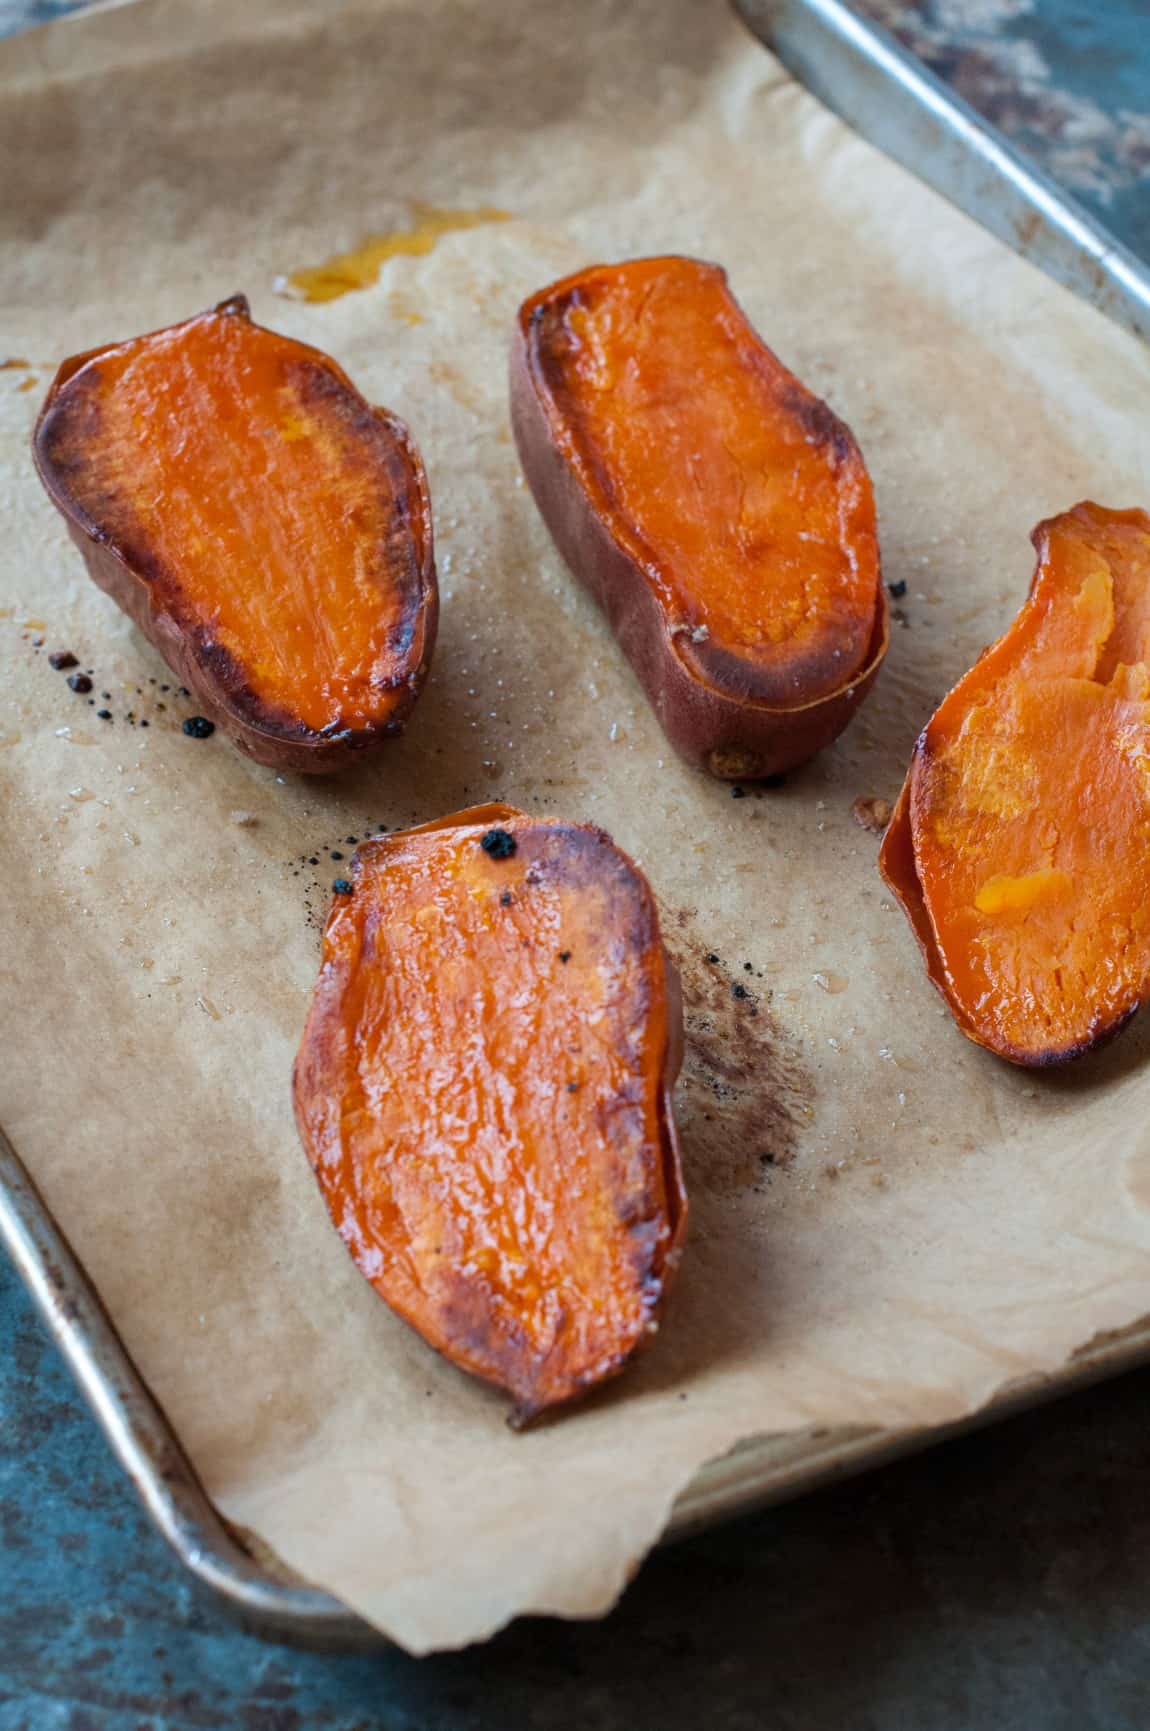 Roasted sweet potatoes out of the oven